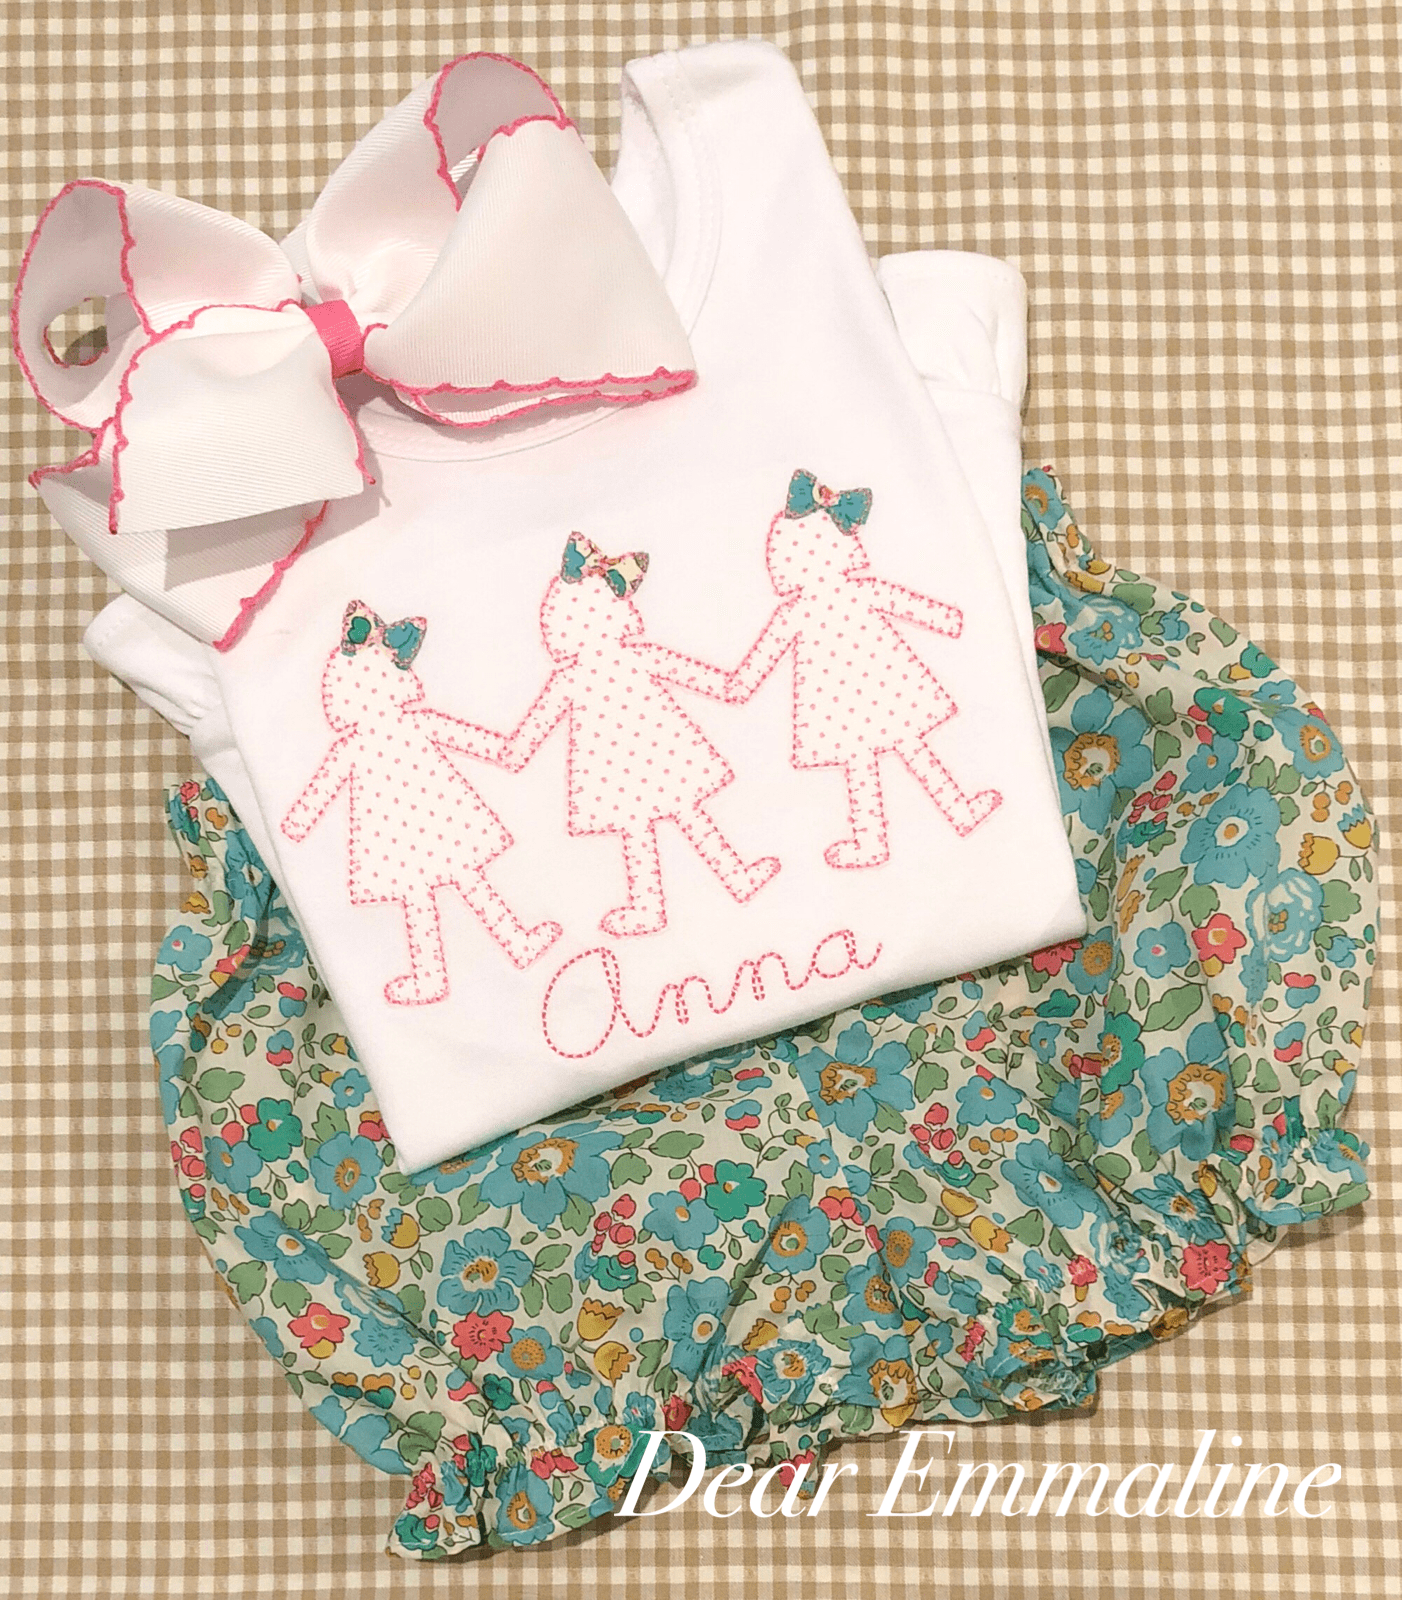 Paper Dolls with Bows Applique Shirt